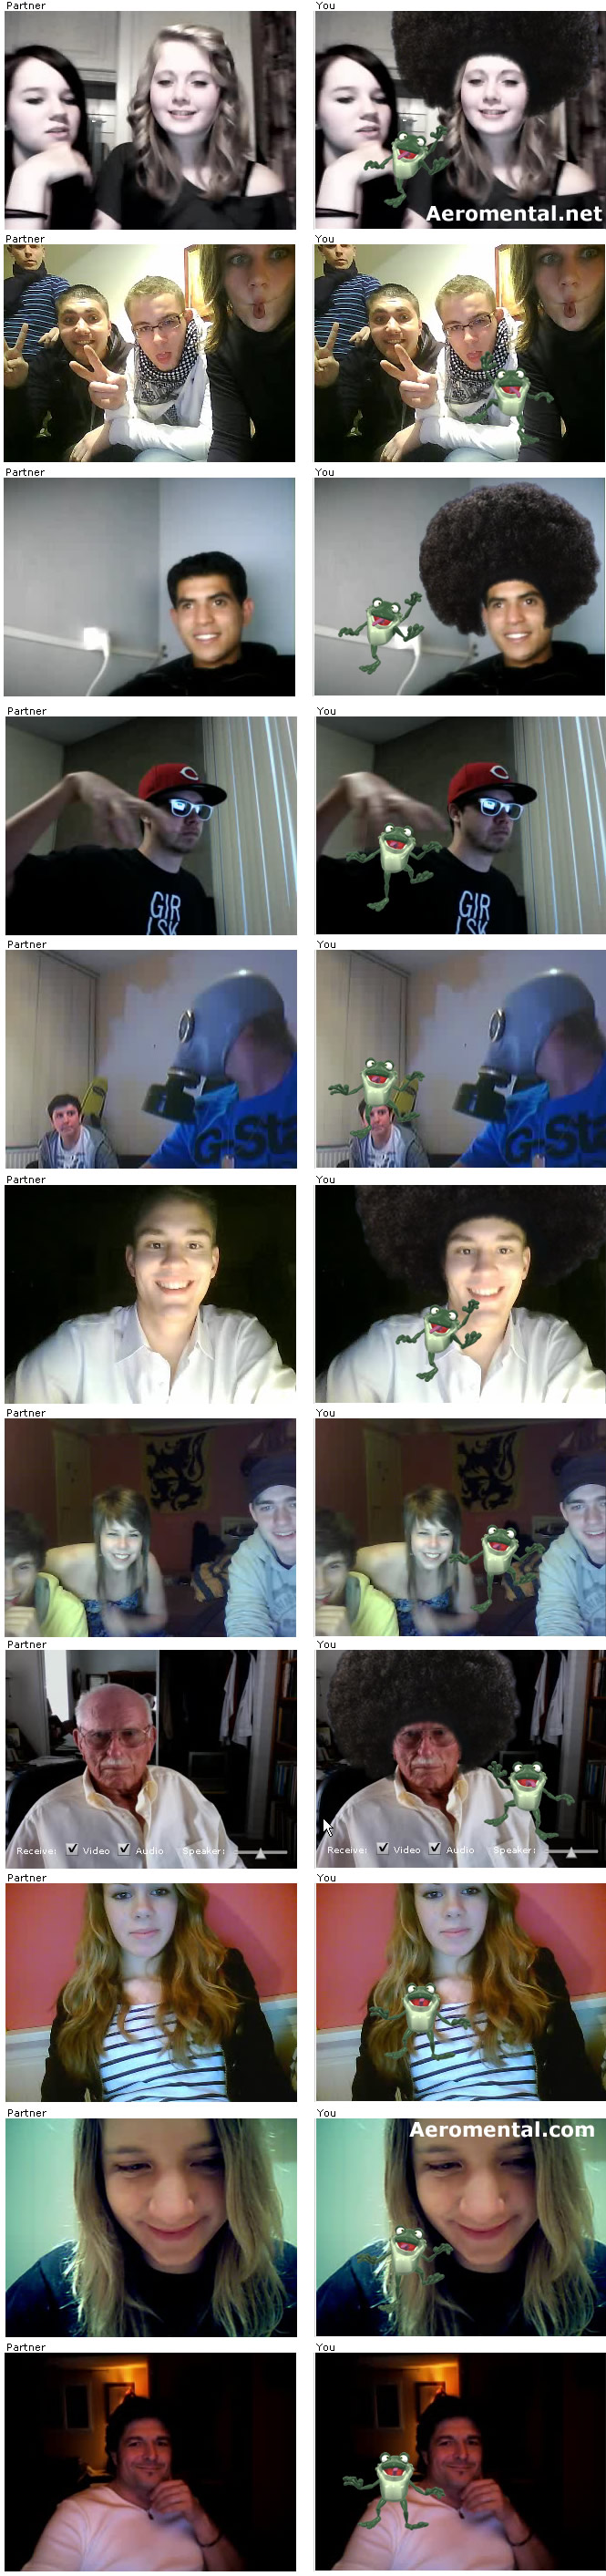 Thumb Chatroulette: The Dancing Frog